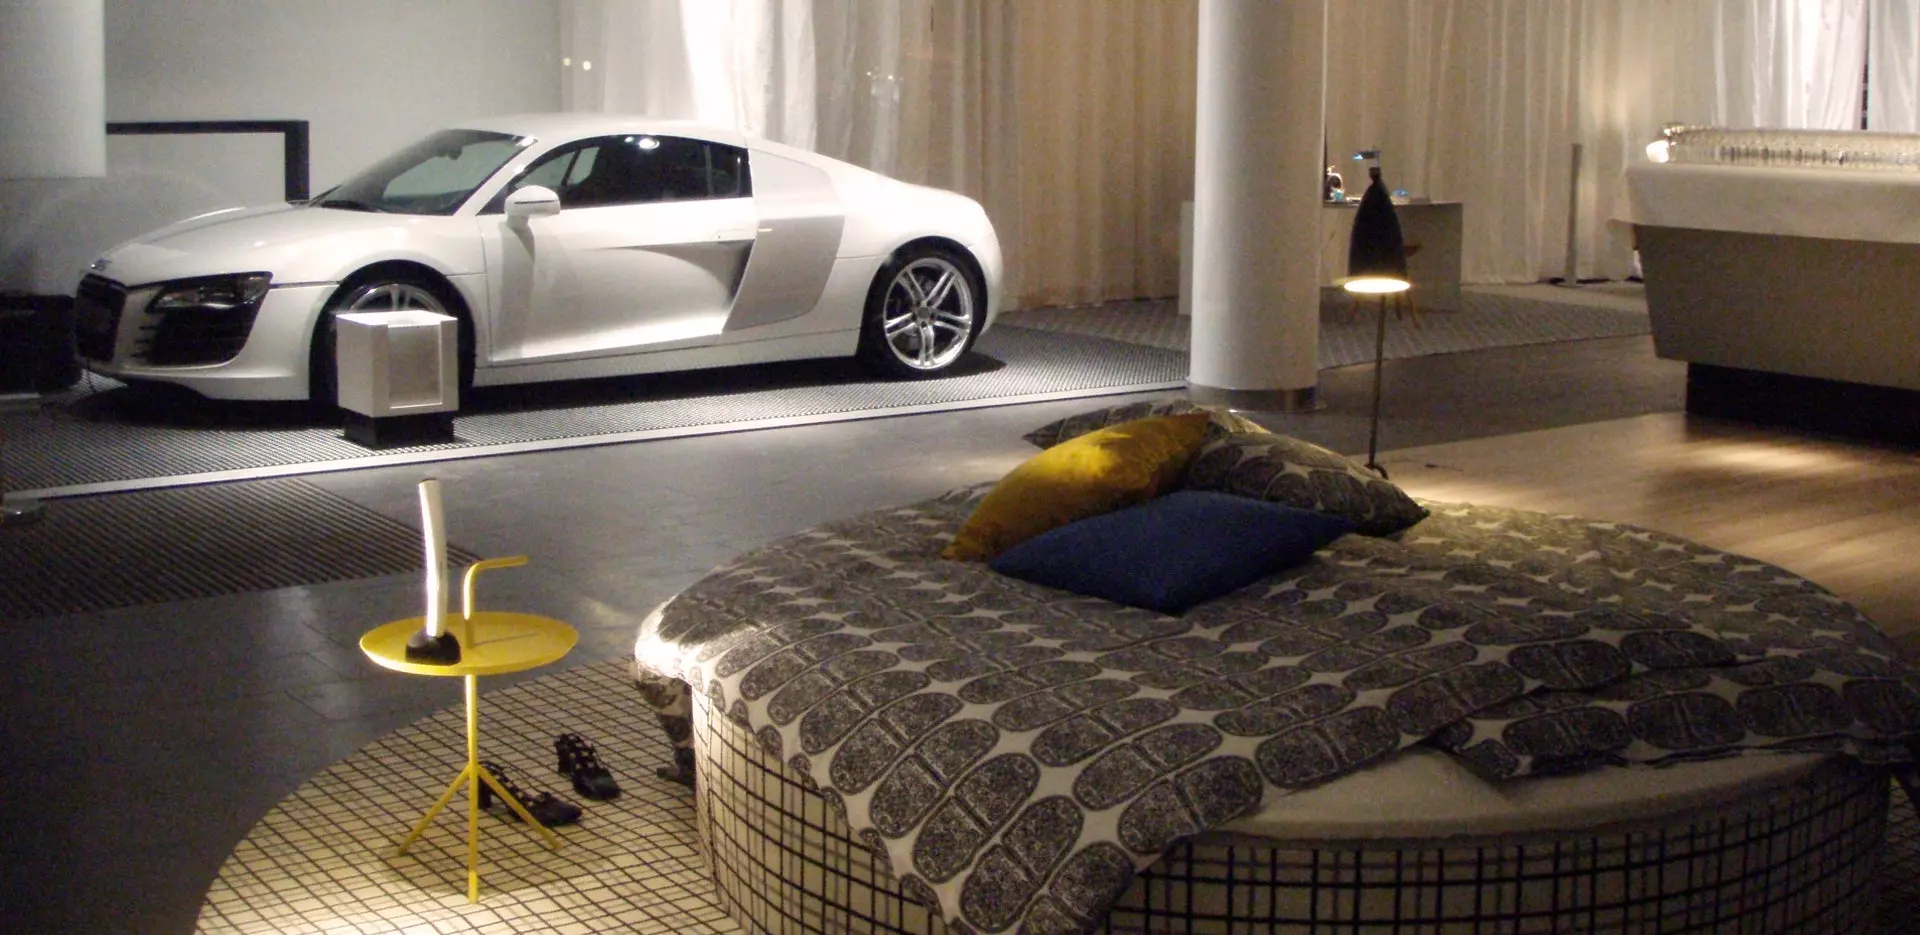 This Swedish Audi Dealer Was a Bedroom and a Showroom